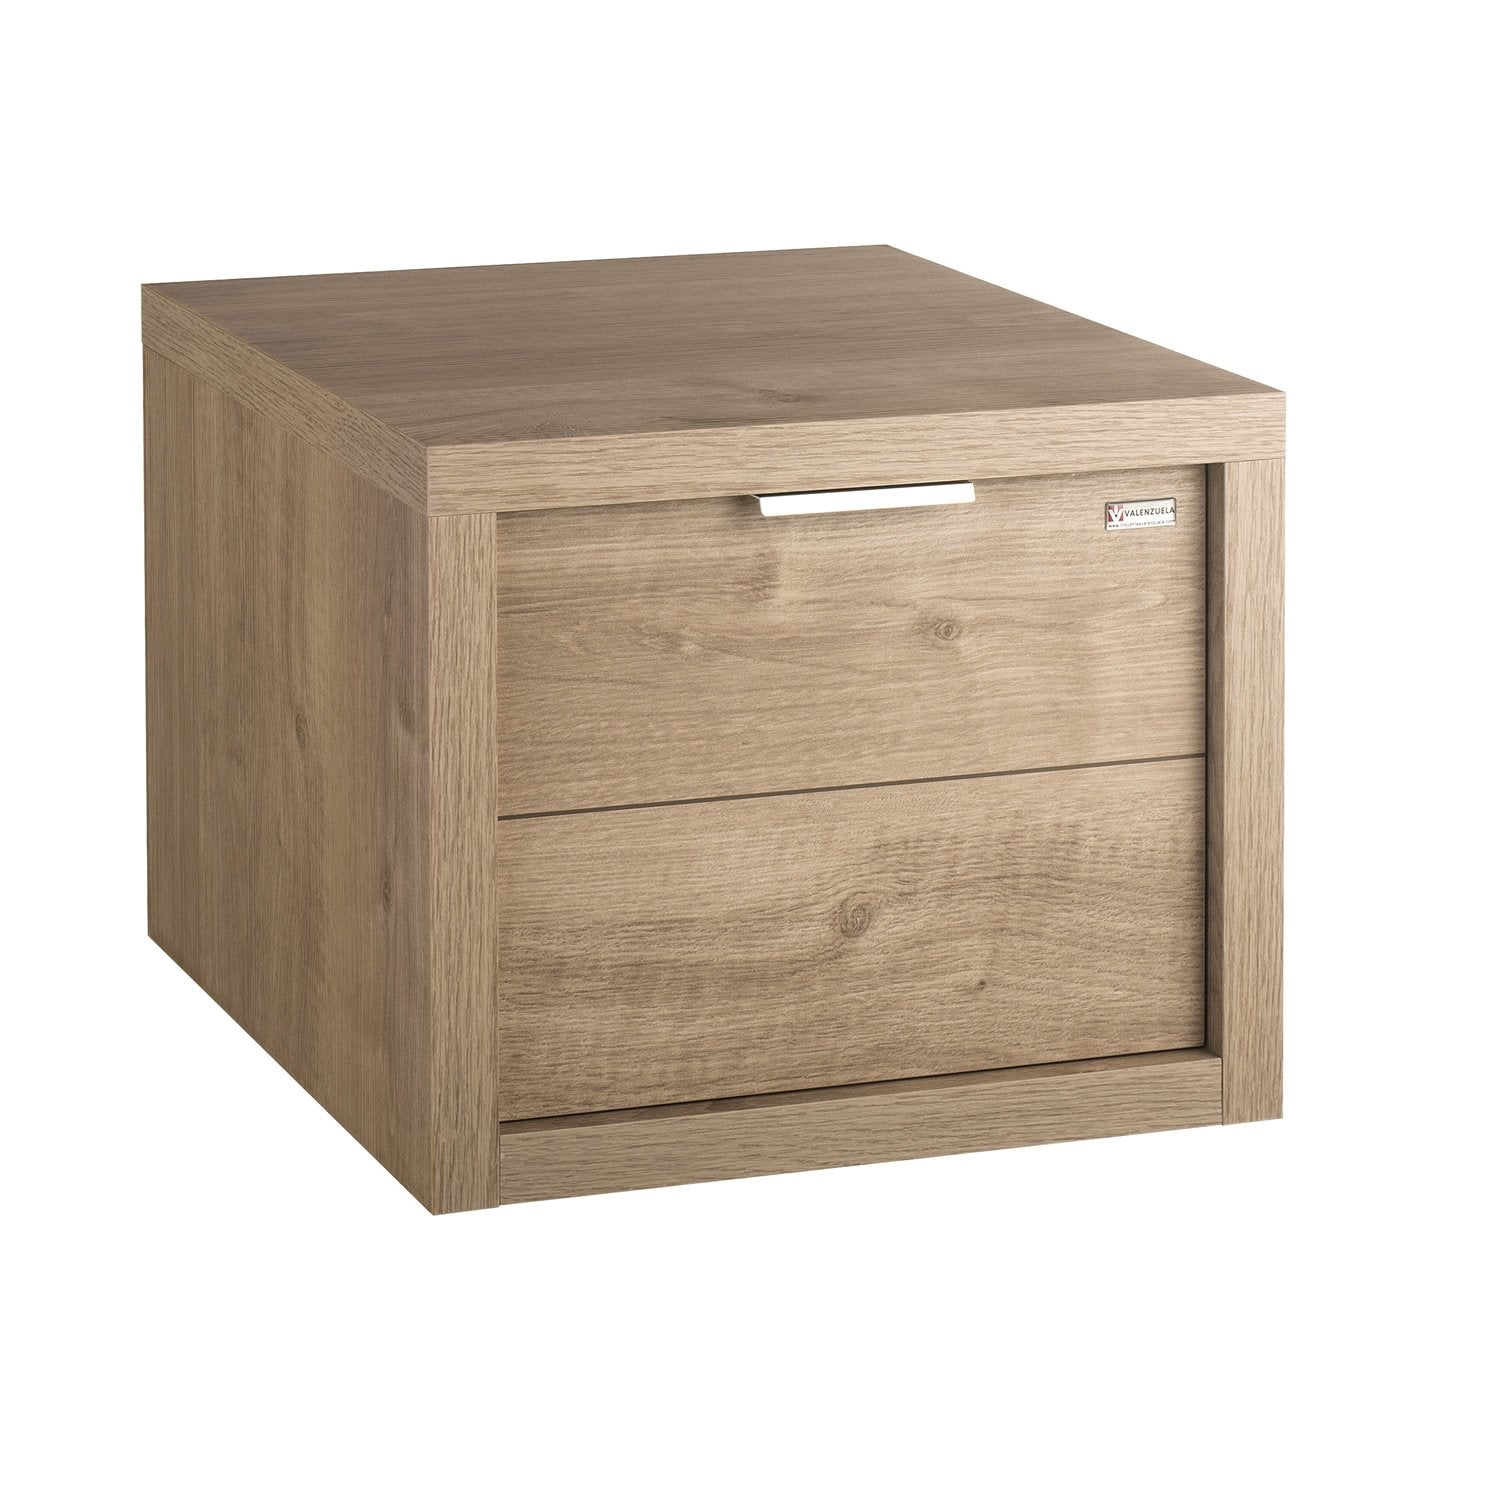 16" Lower Side Cabinet, Wall Mount, 1 Drawer whit Handle and Soft Close, Oak, Serie Tino by VALENZUELA